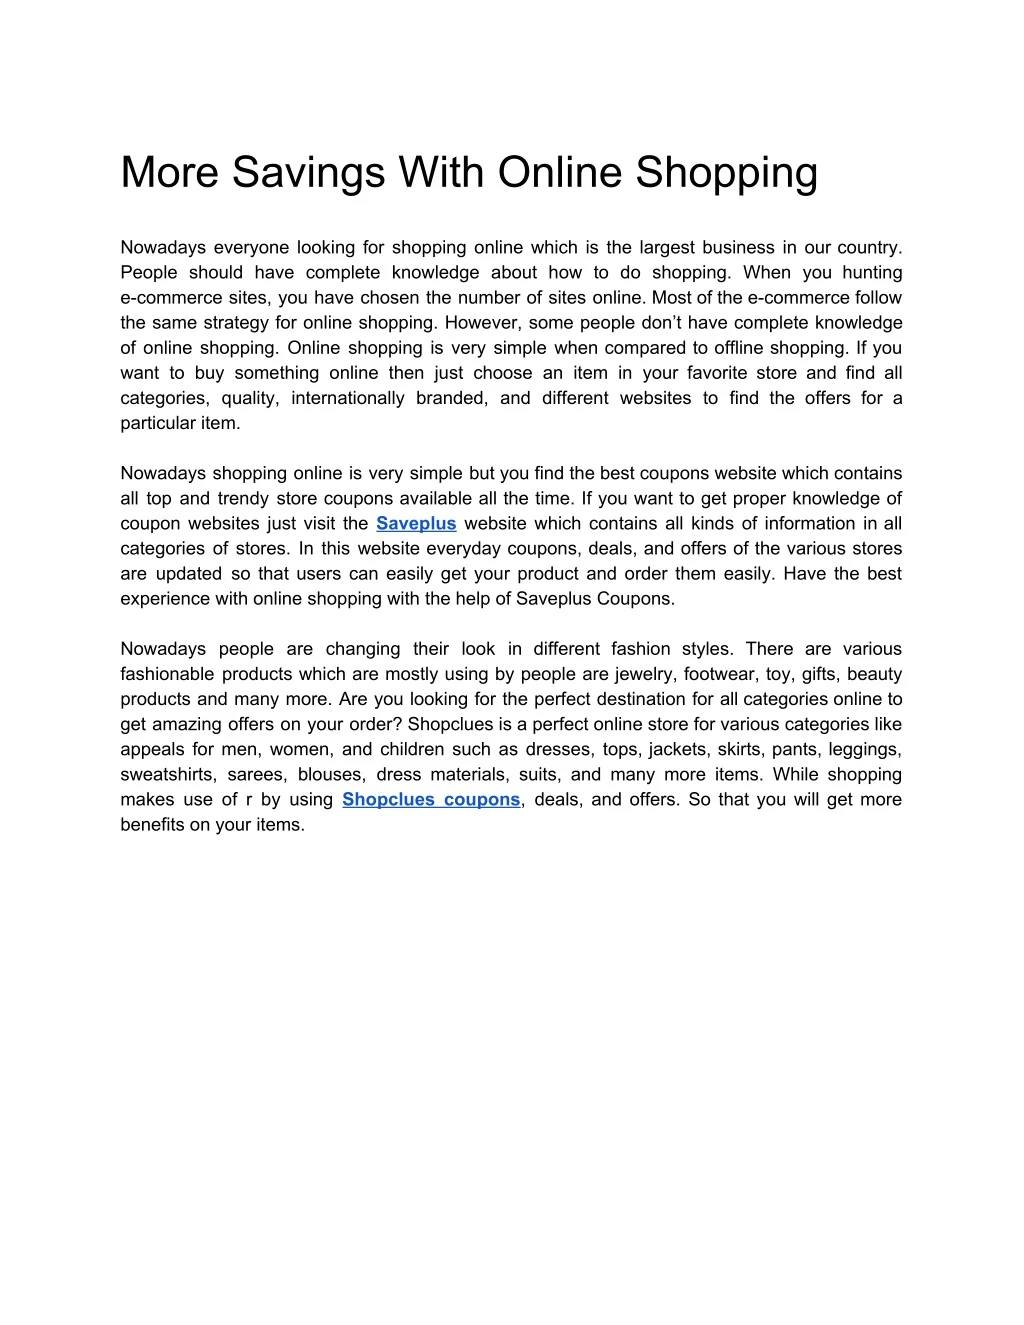 more savings with online shopping